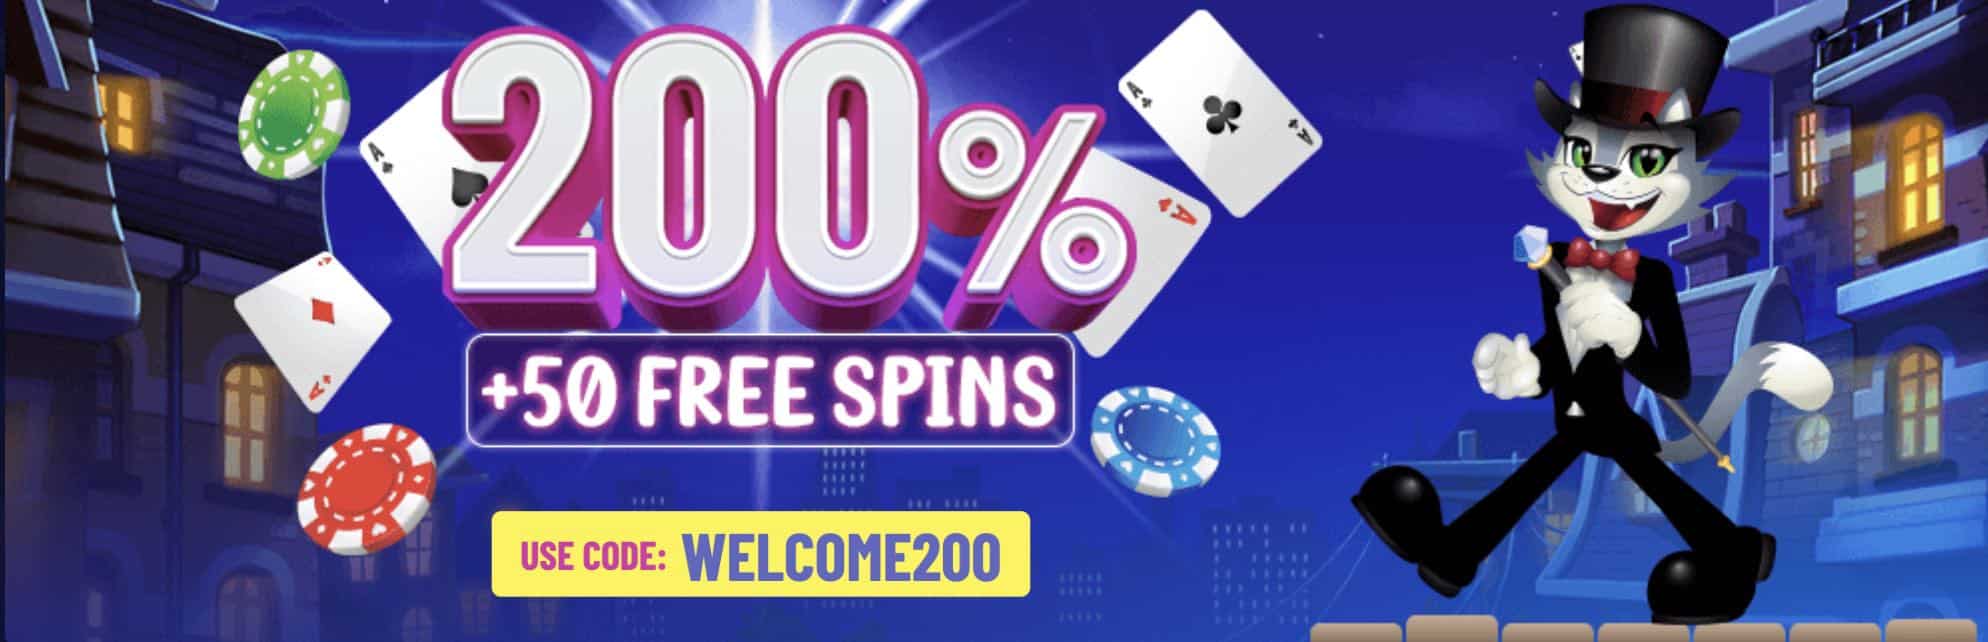 Screenshot of the welcome offer banner ad from the CoolCat casino welcome